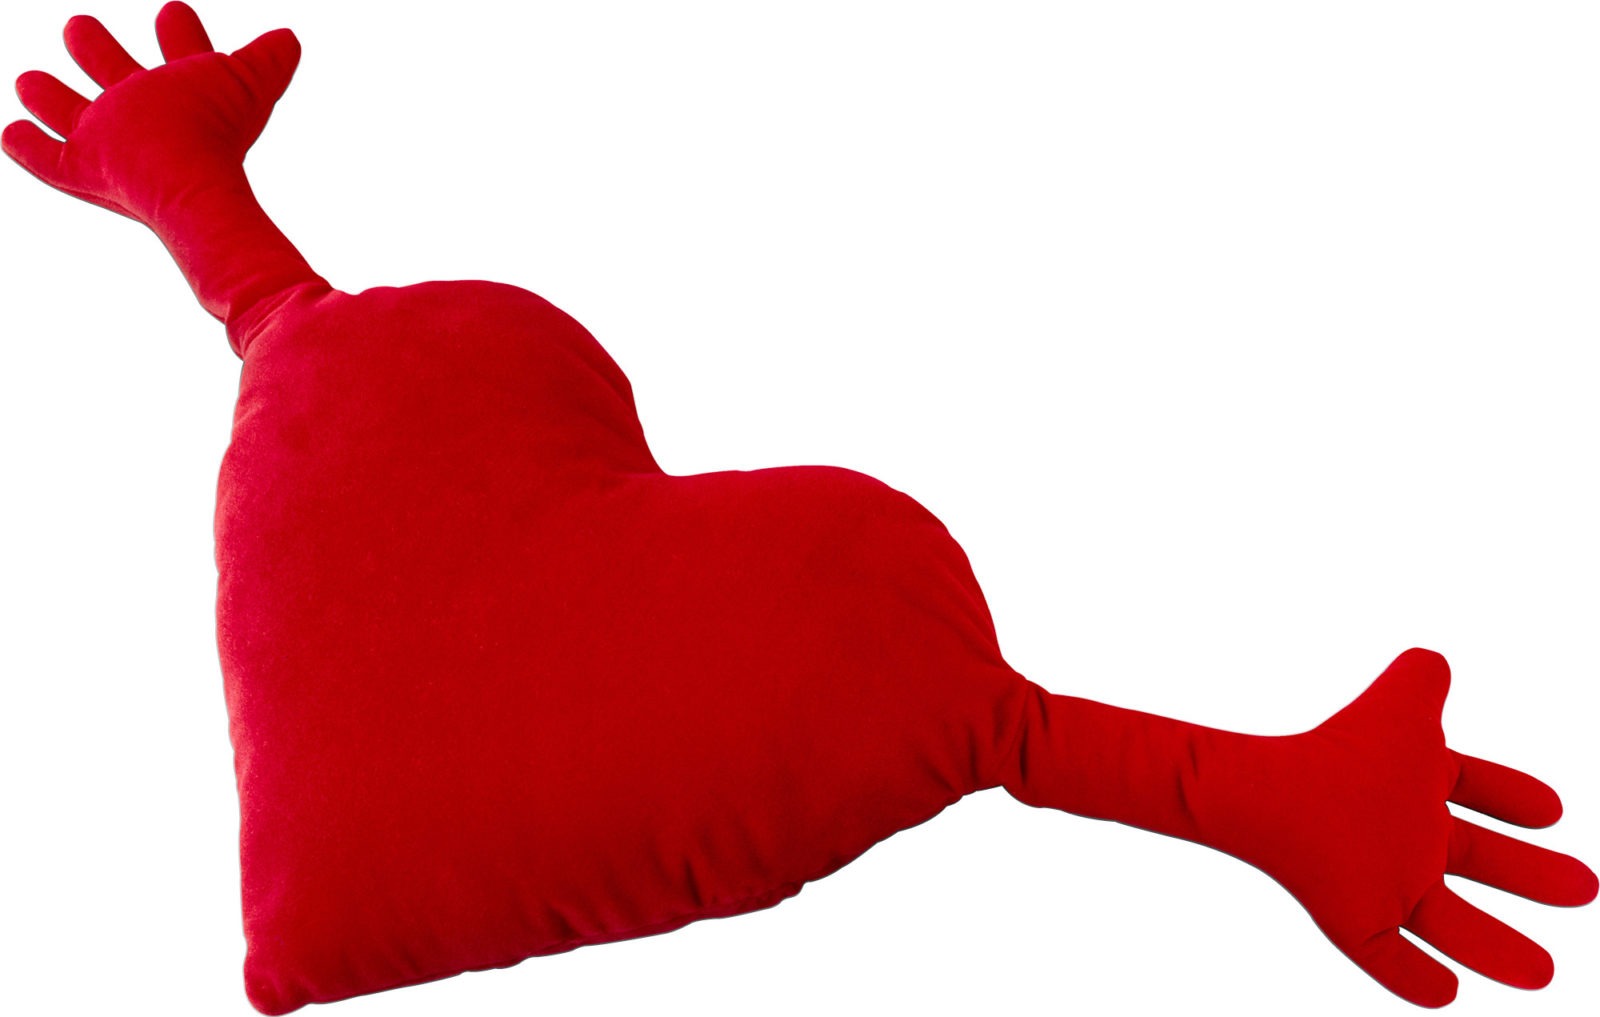 Heart-shaped child’s cuddly cushion with outstretched arms, FAMNIG.